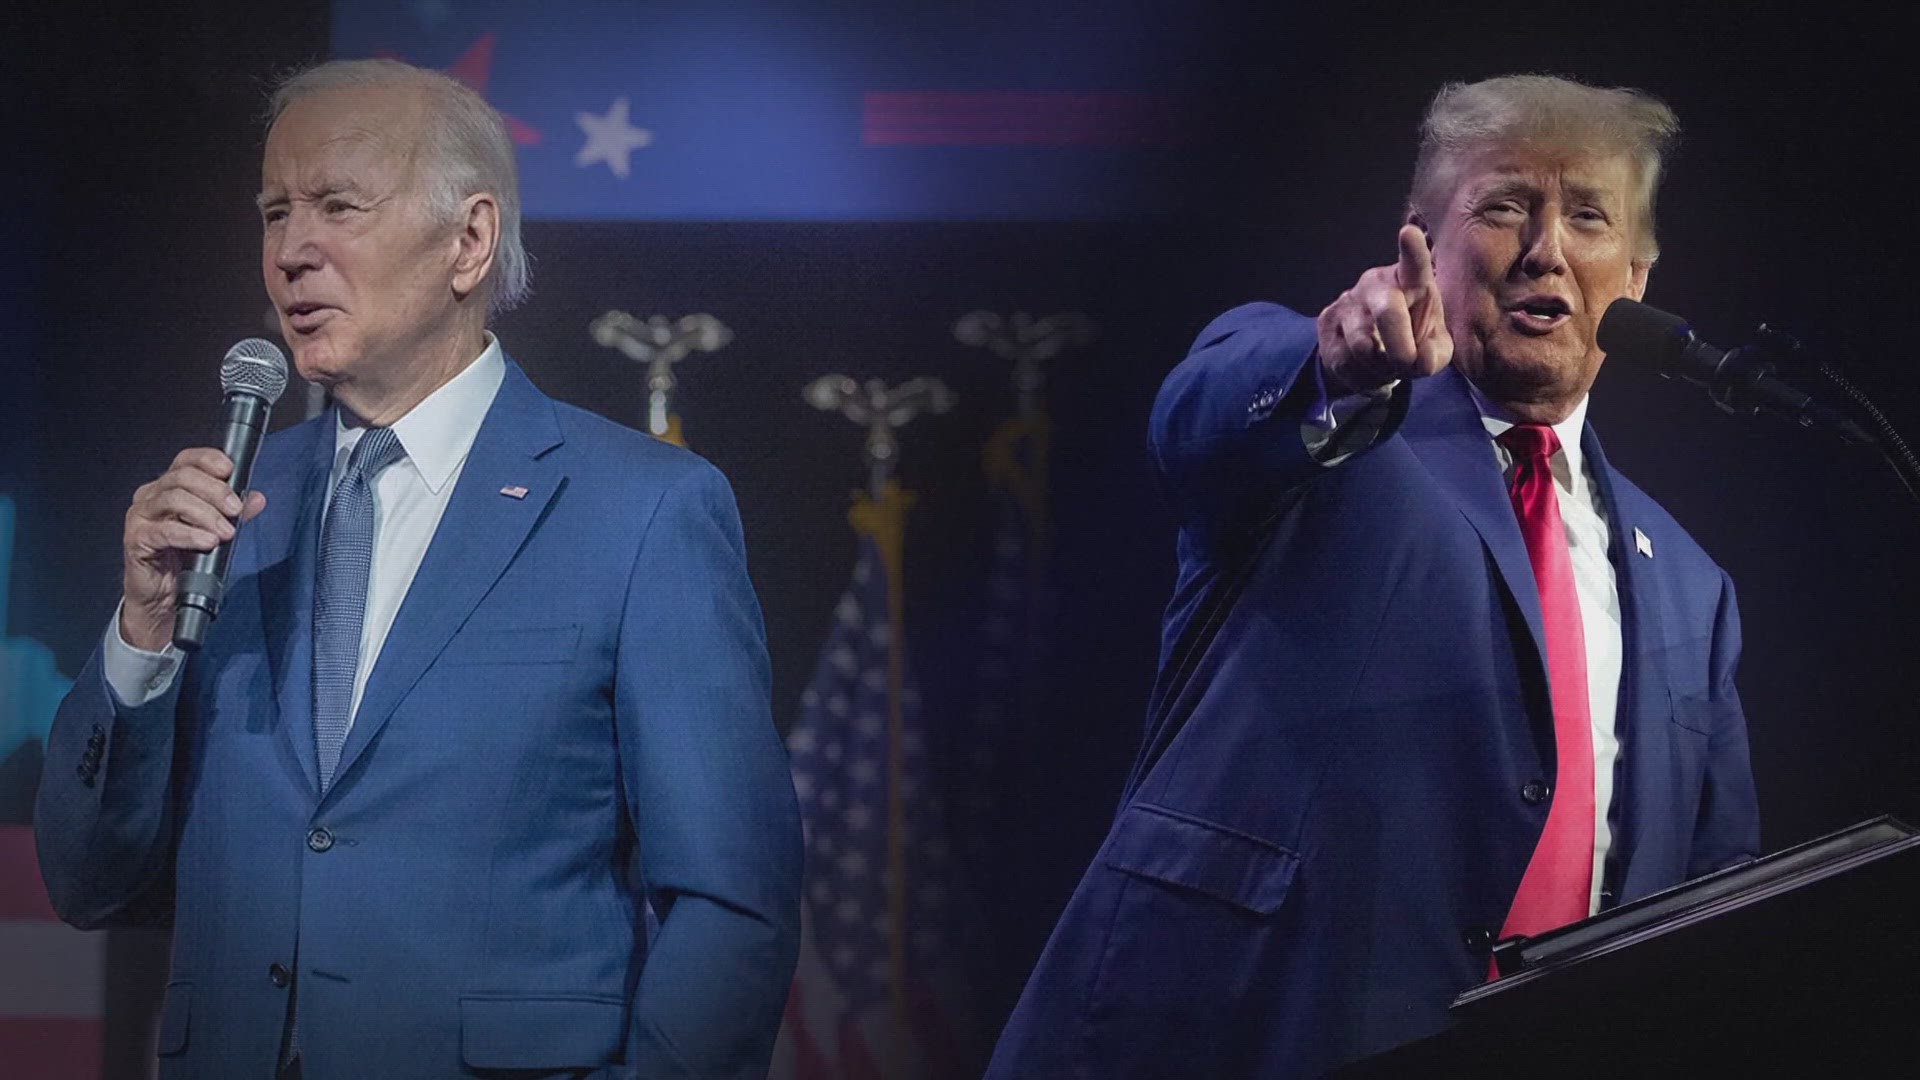 President Joe Biden and his predecessor, Donald Trump, mostly swept the coast-to-coast contests happening in more than a dozen states on Super Tuesday.